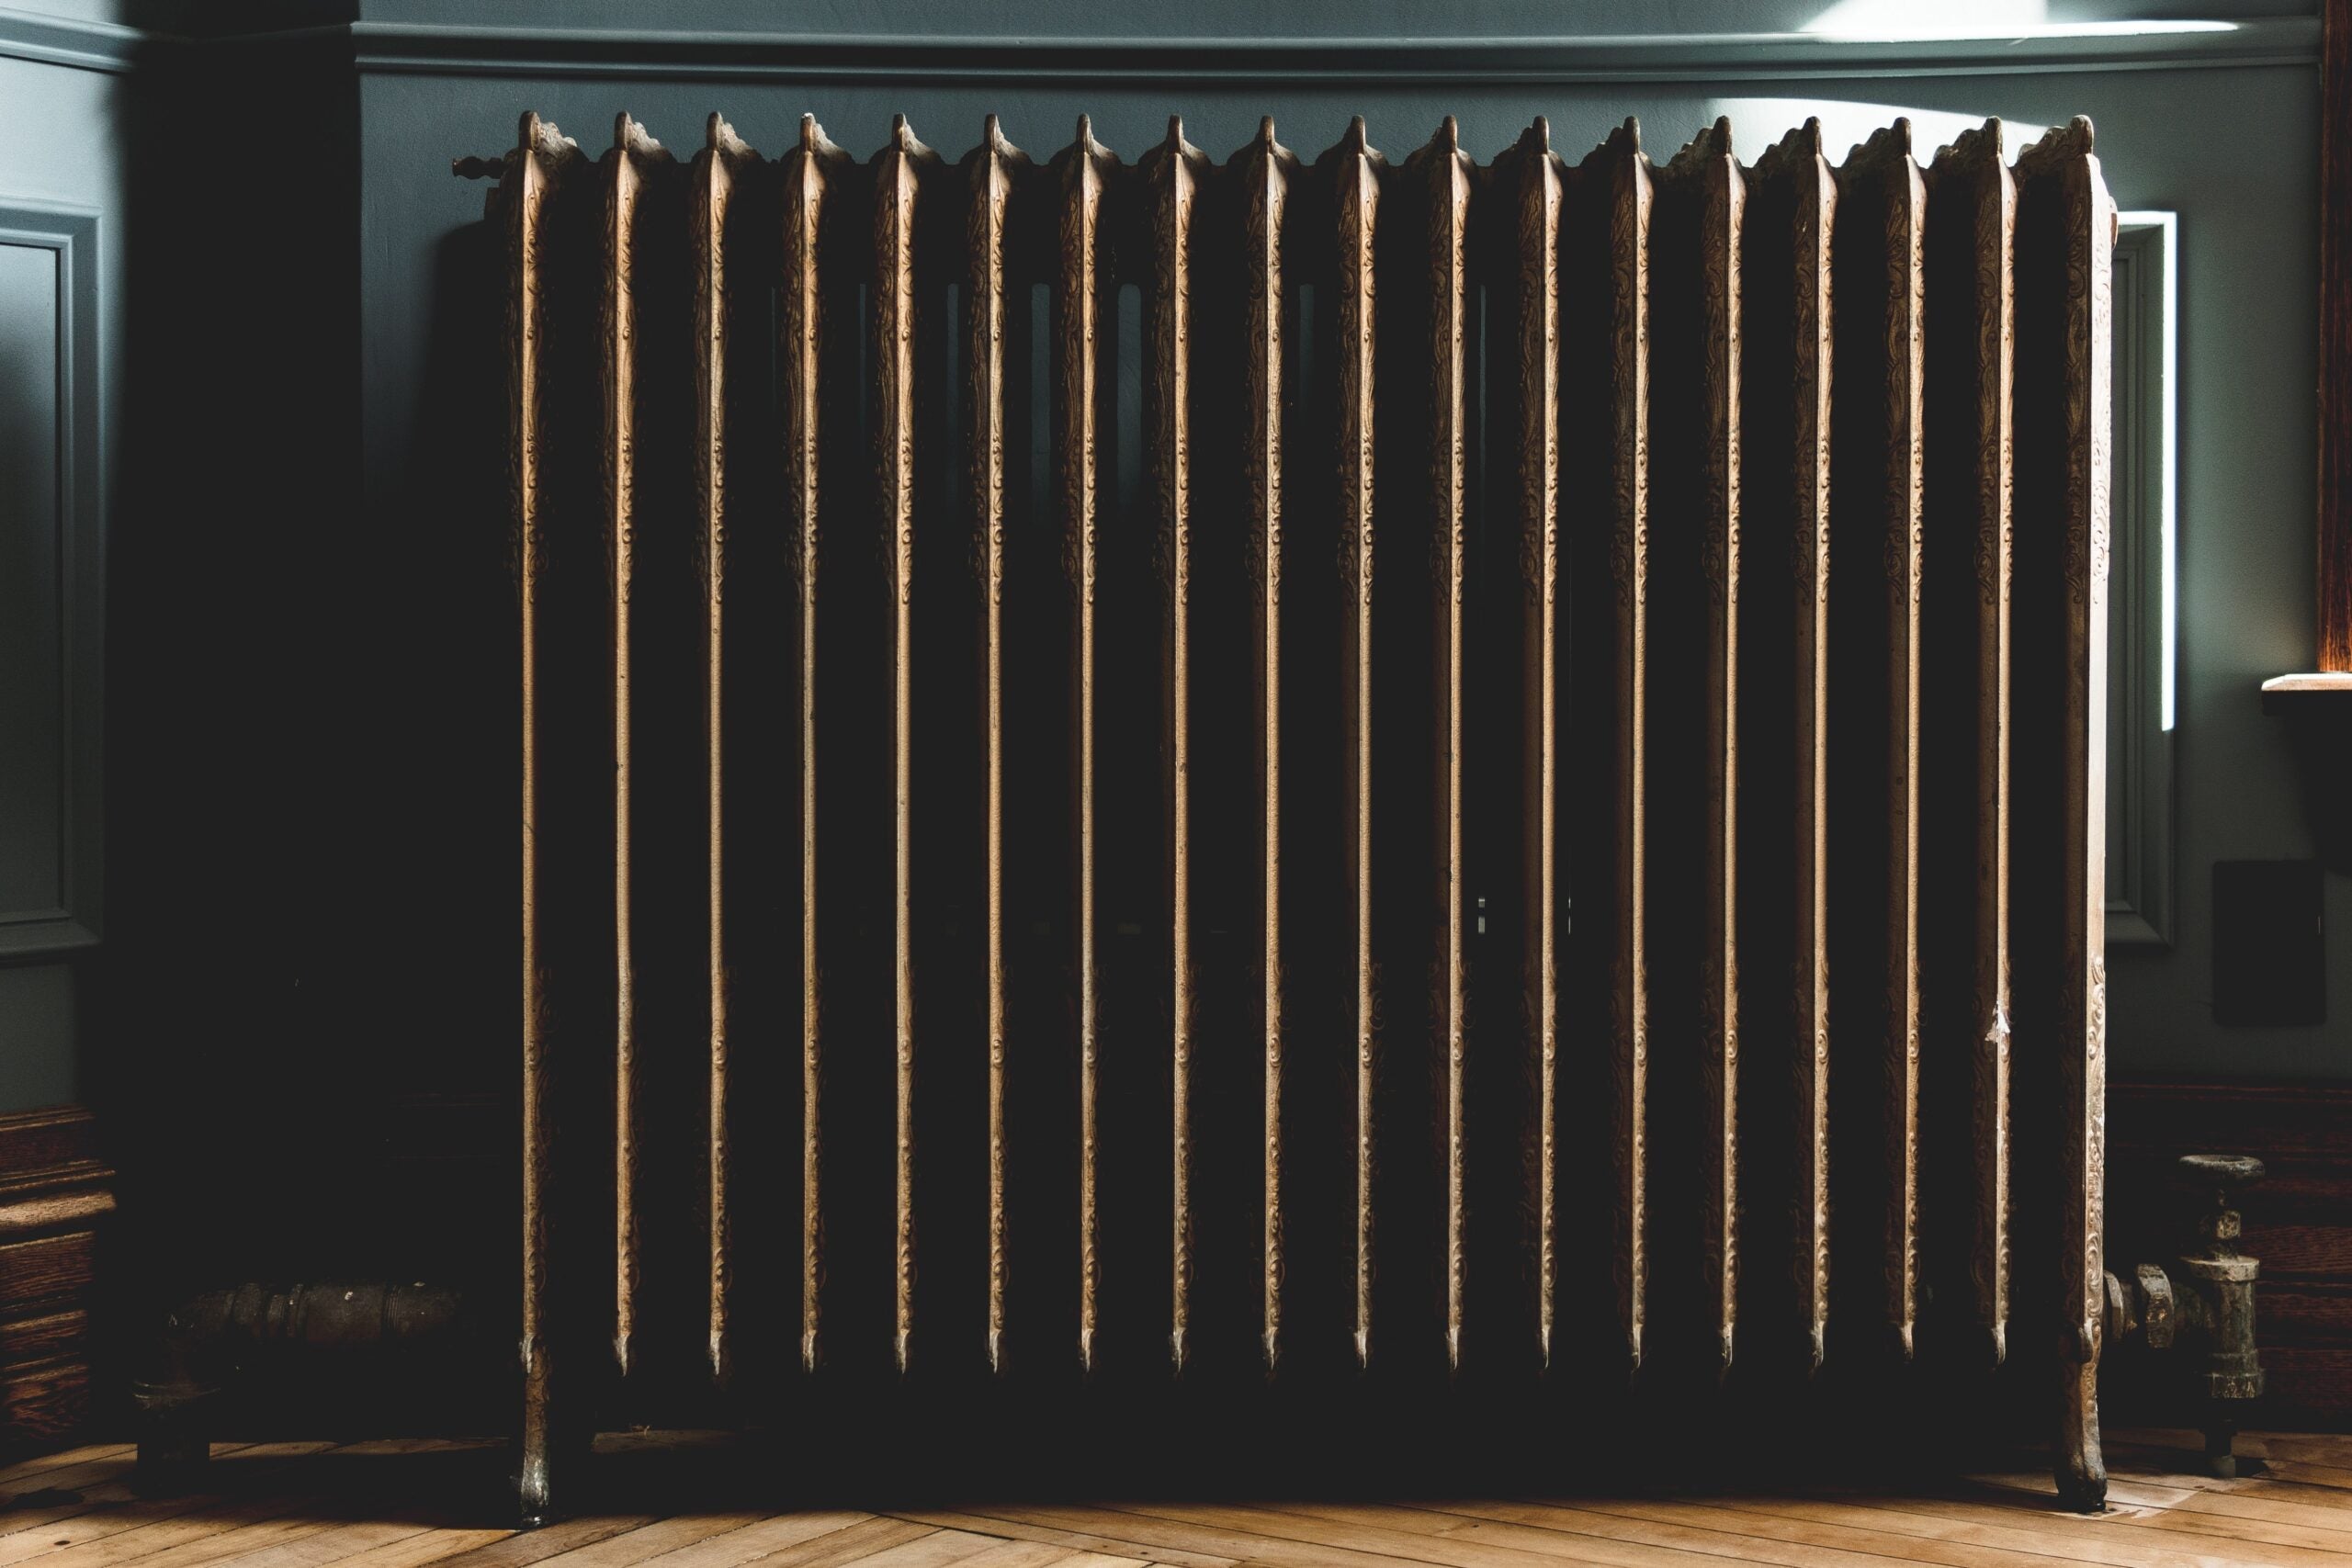 Why Are Radiators Cold At The Bottom?